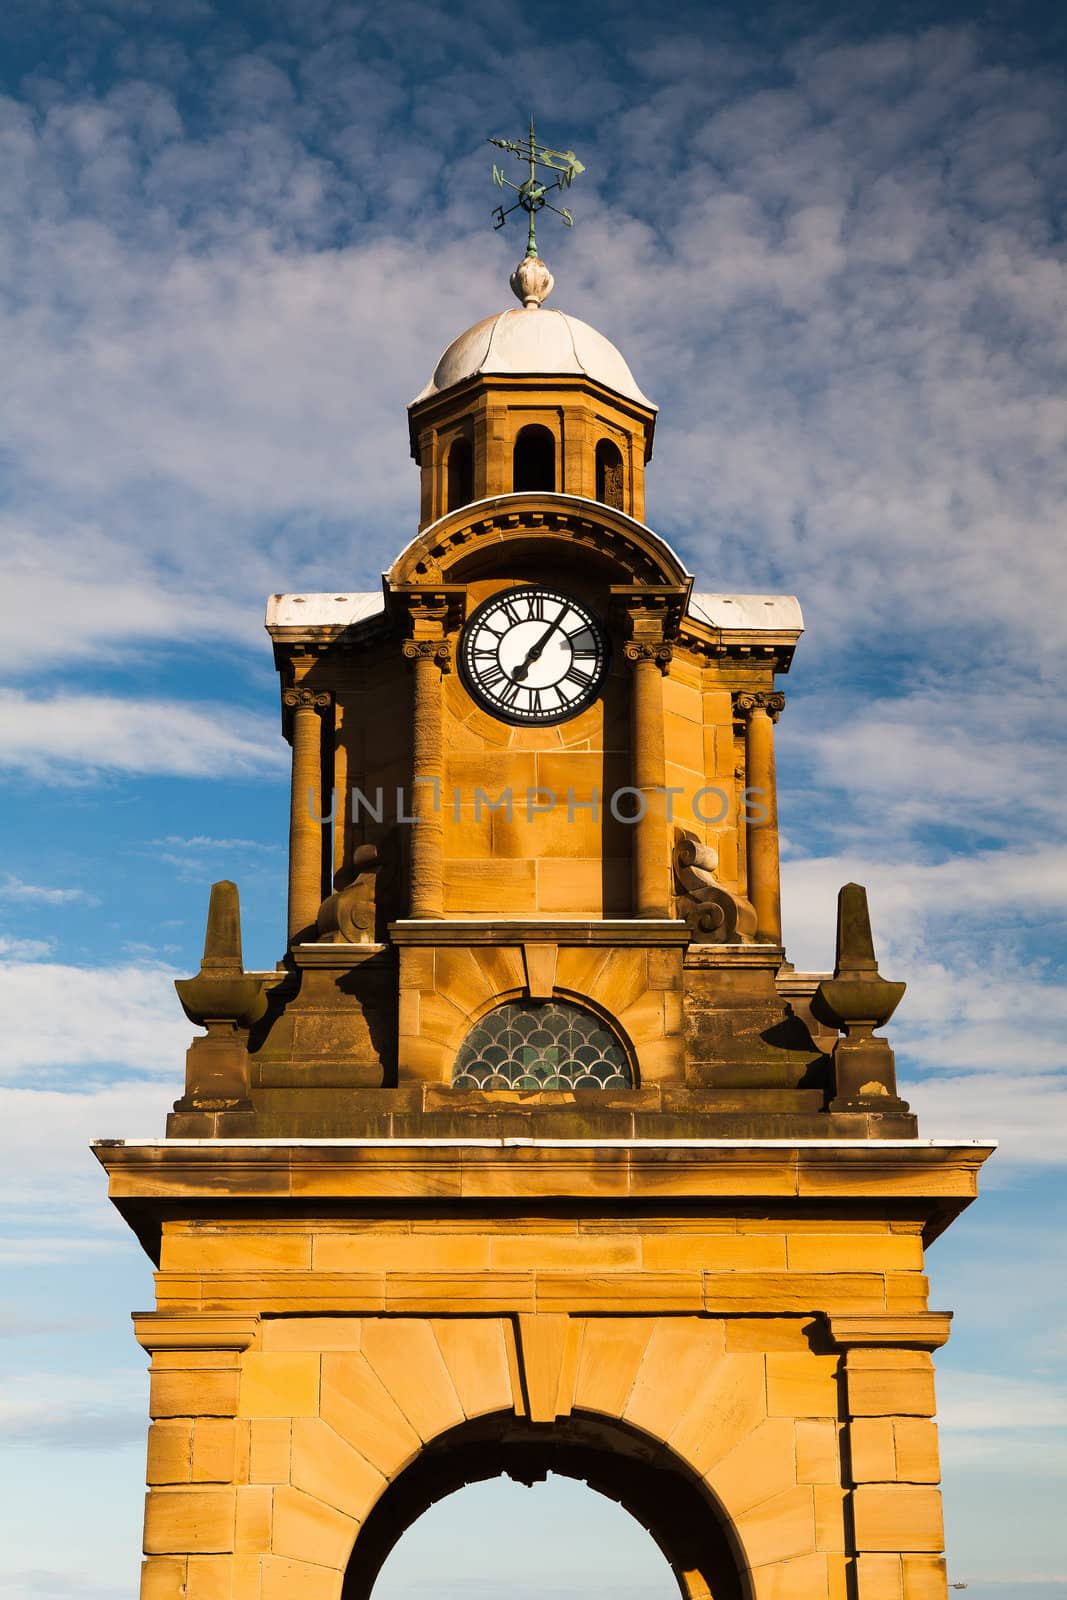 Holbeck Clock Tower in Scarborough in Great Britain